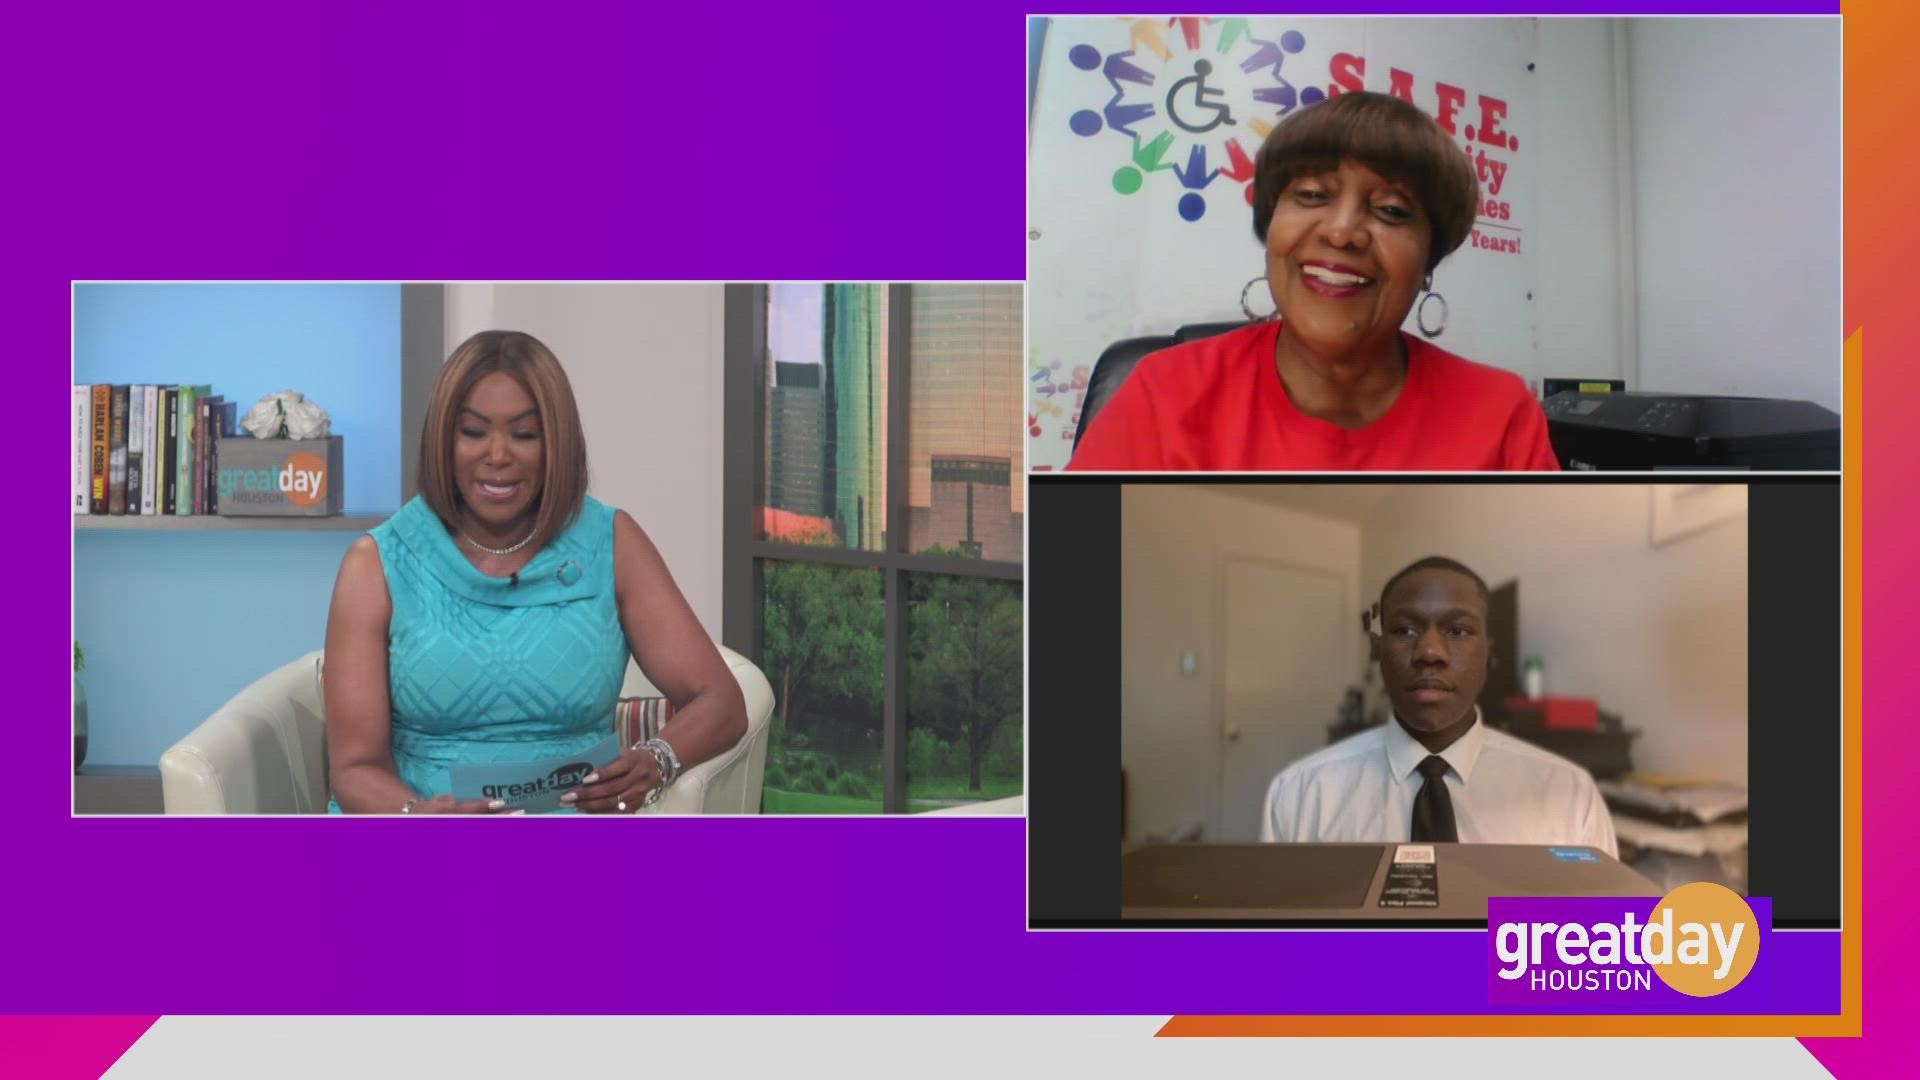 Thelma Scott, Founder of S.A.F.E. Diversity Communities, along with her mentee, Kobe Hadnot, discuss their upcoming Virtual Blue Carpet Scholarship and Awards Gala